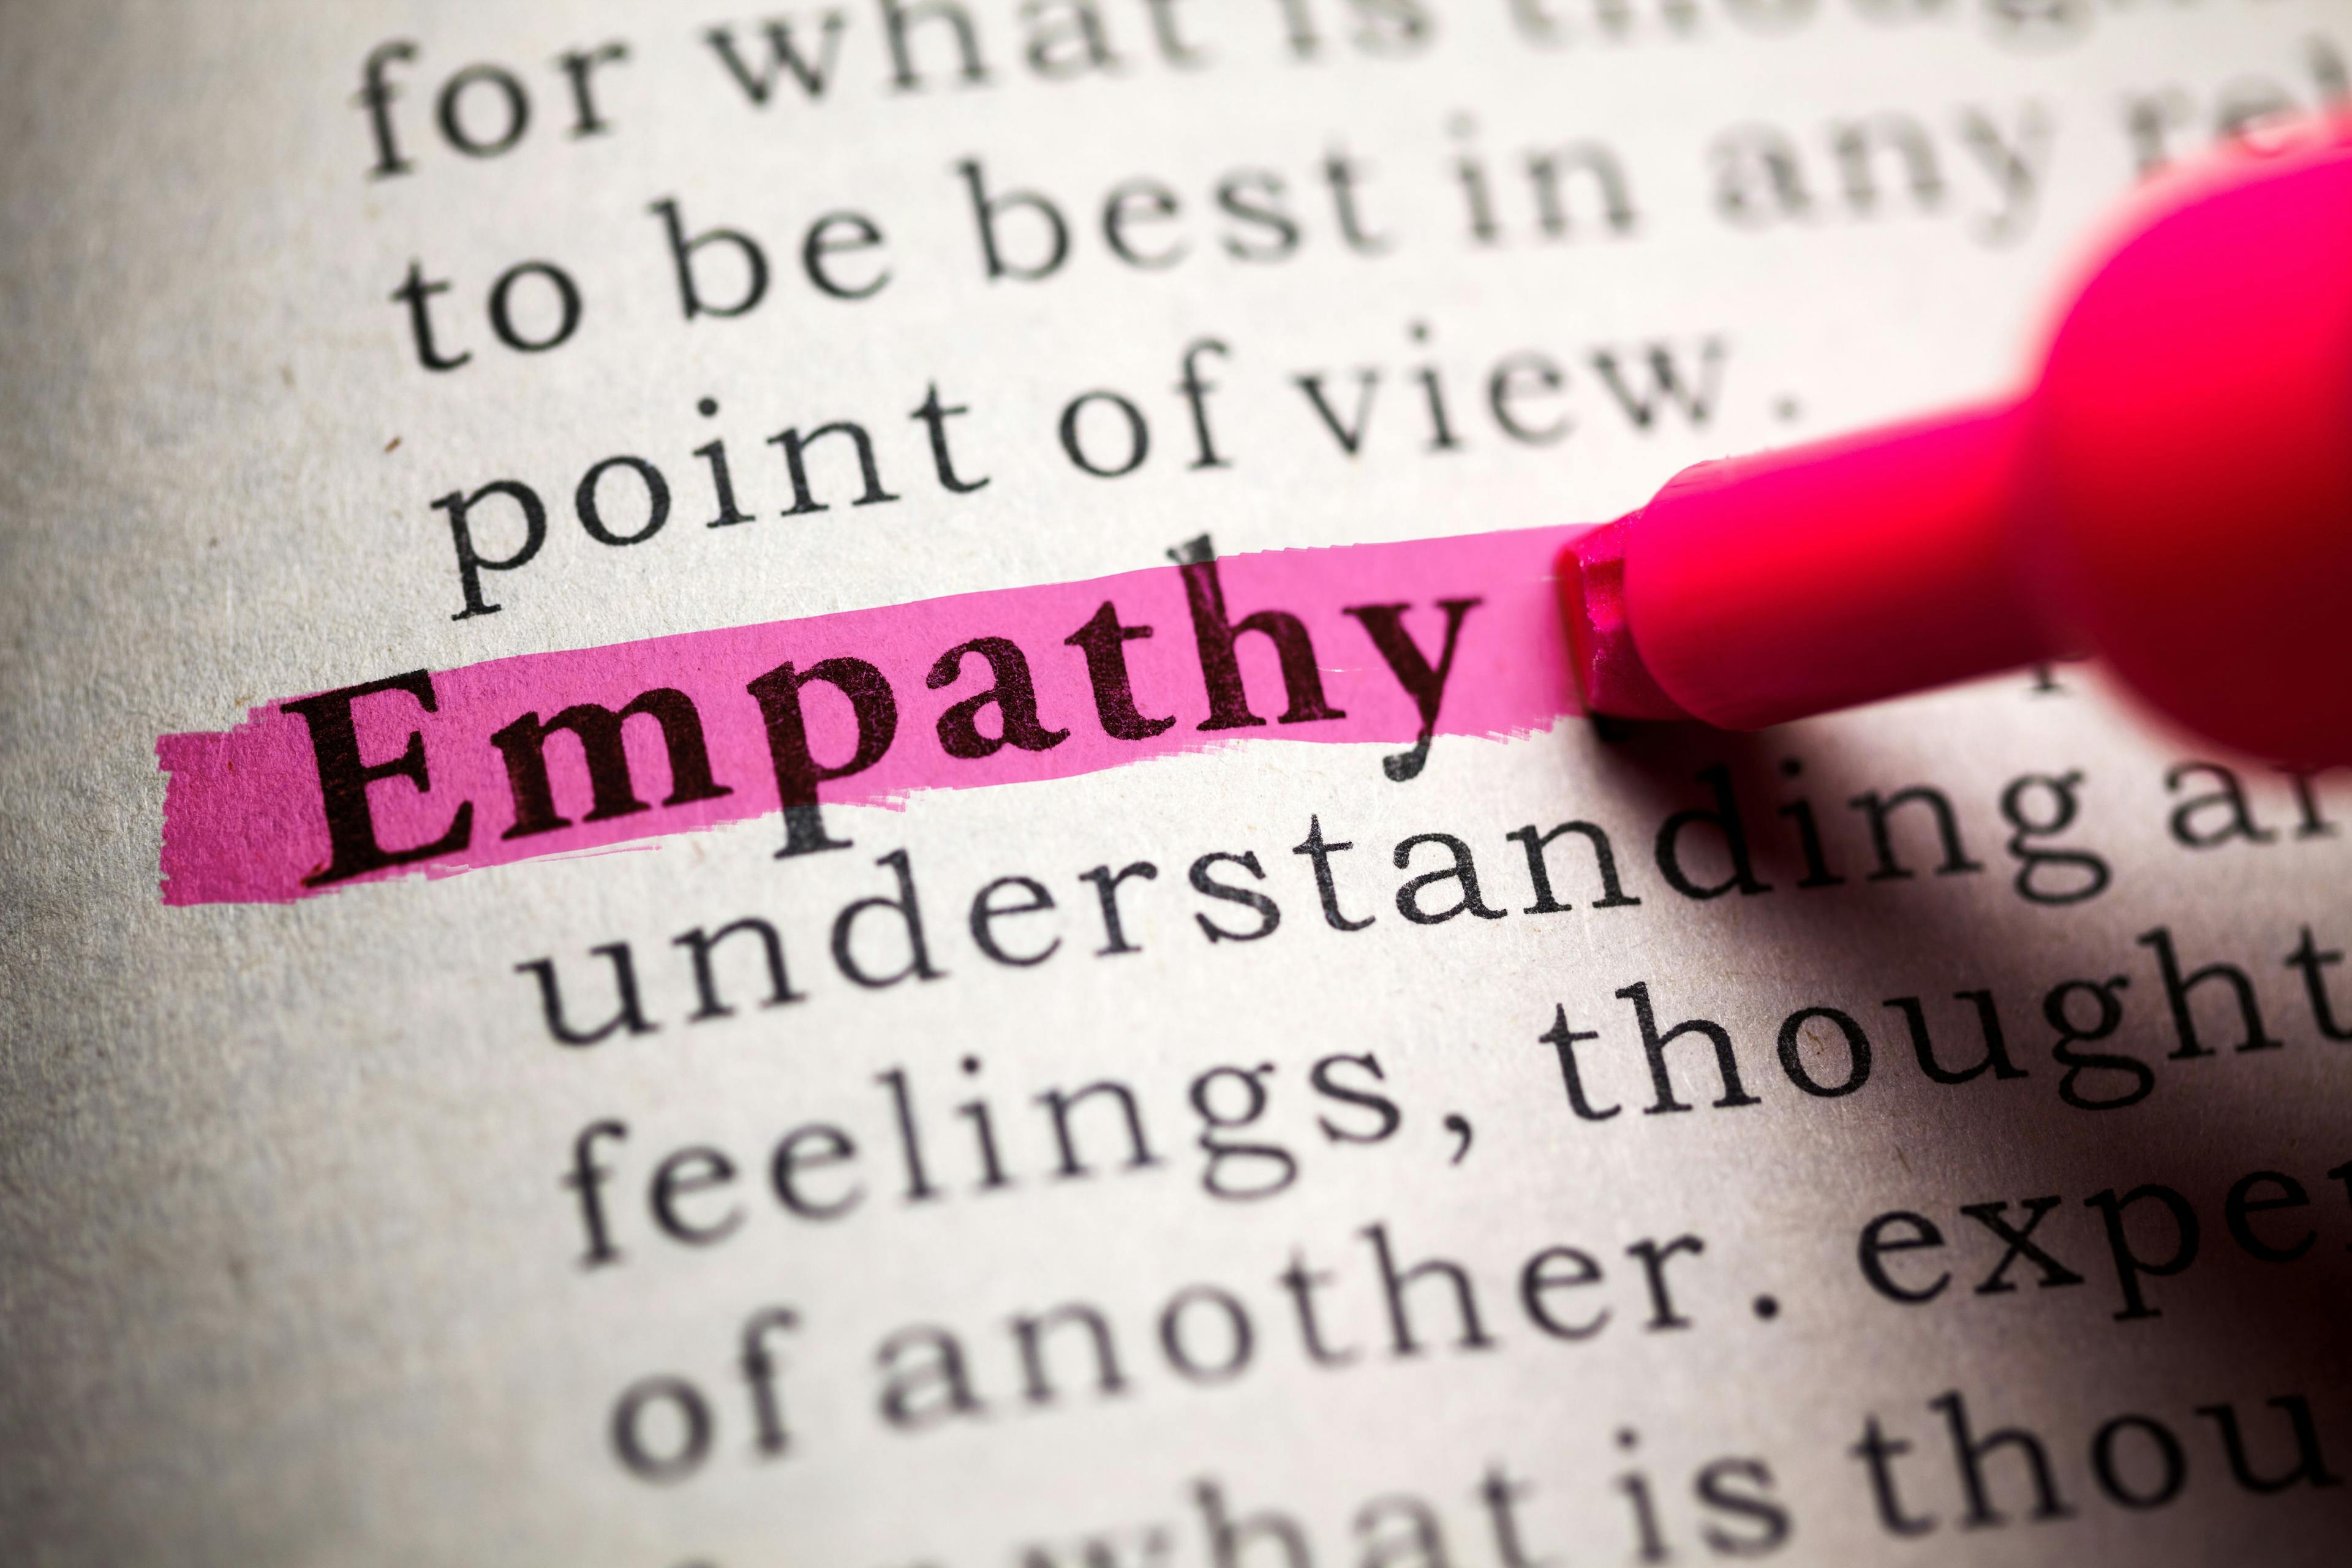 How can we bring empathy back to society worldwide?